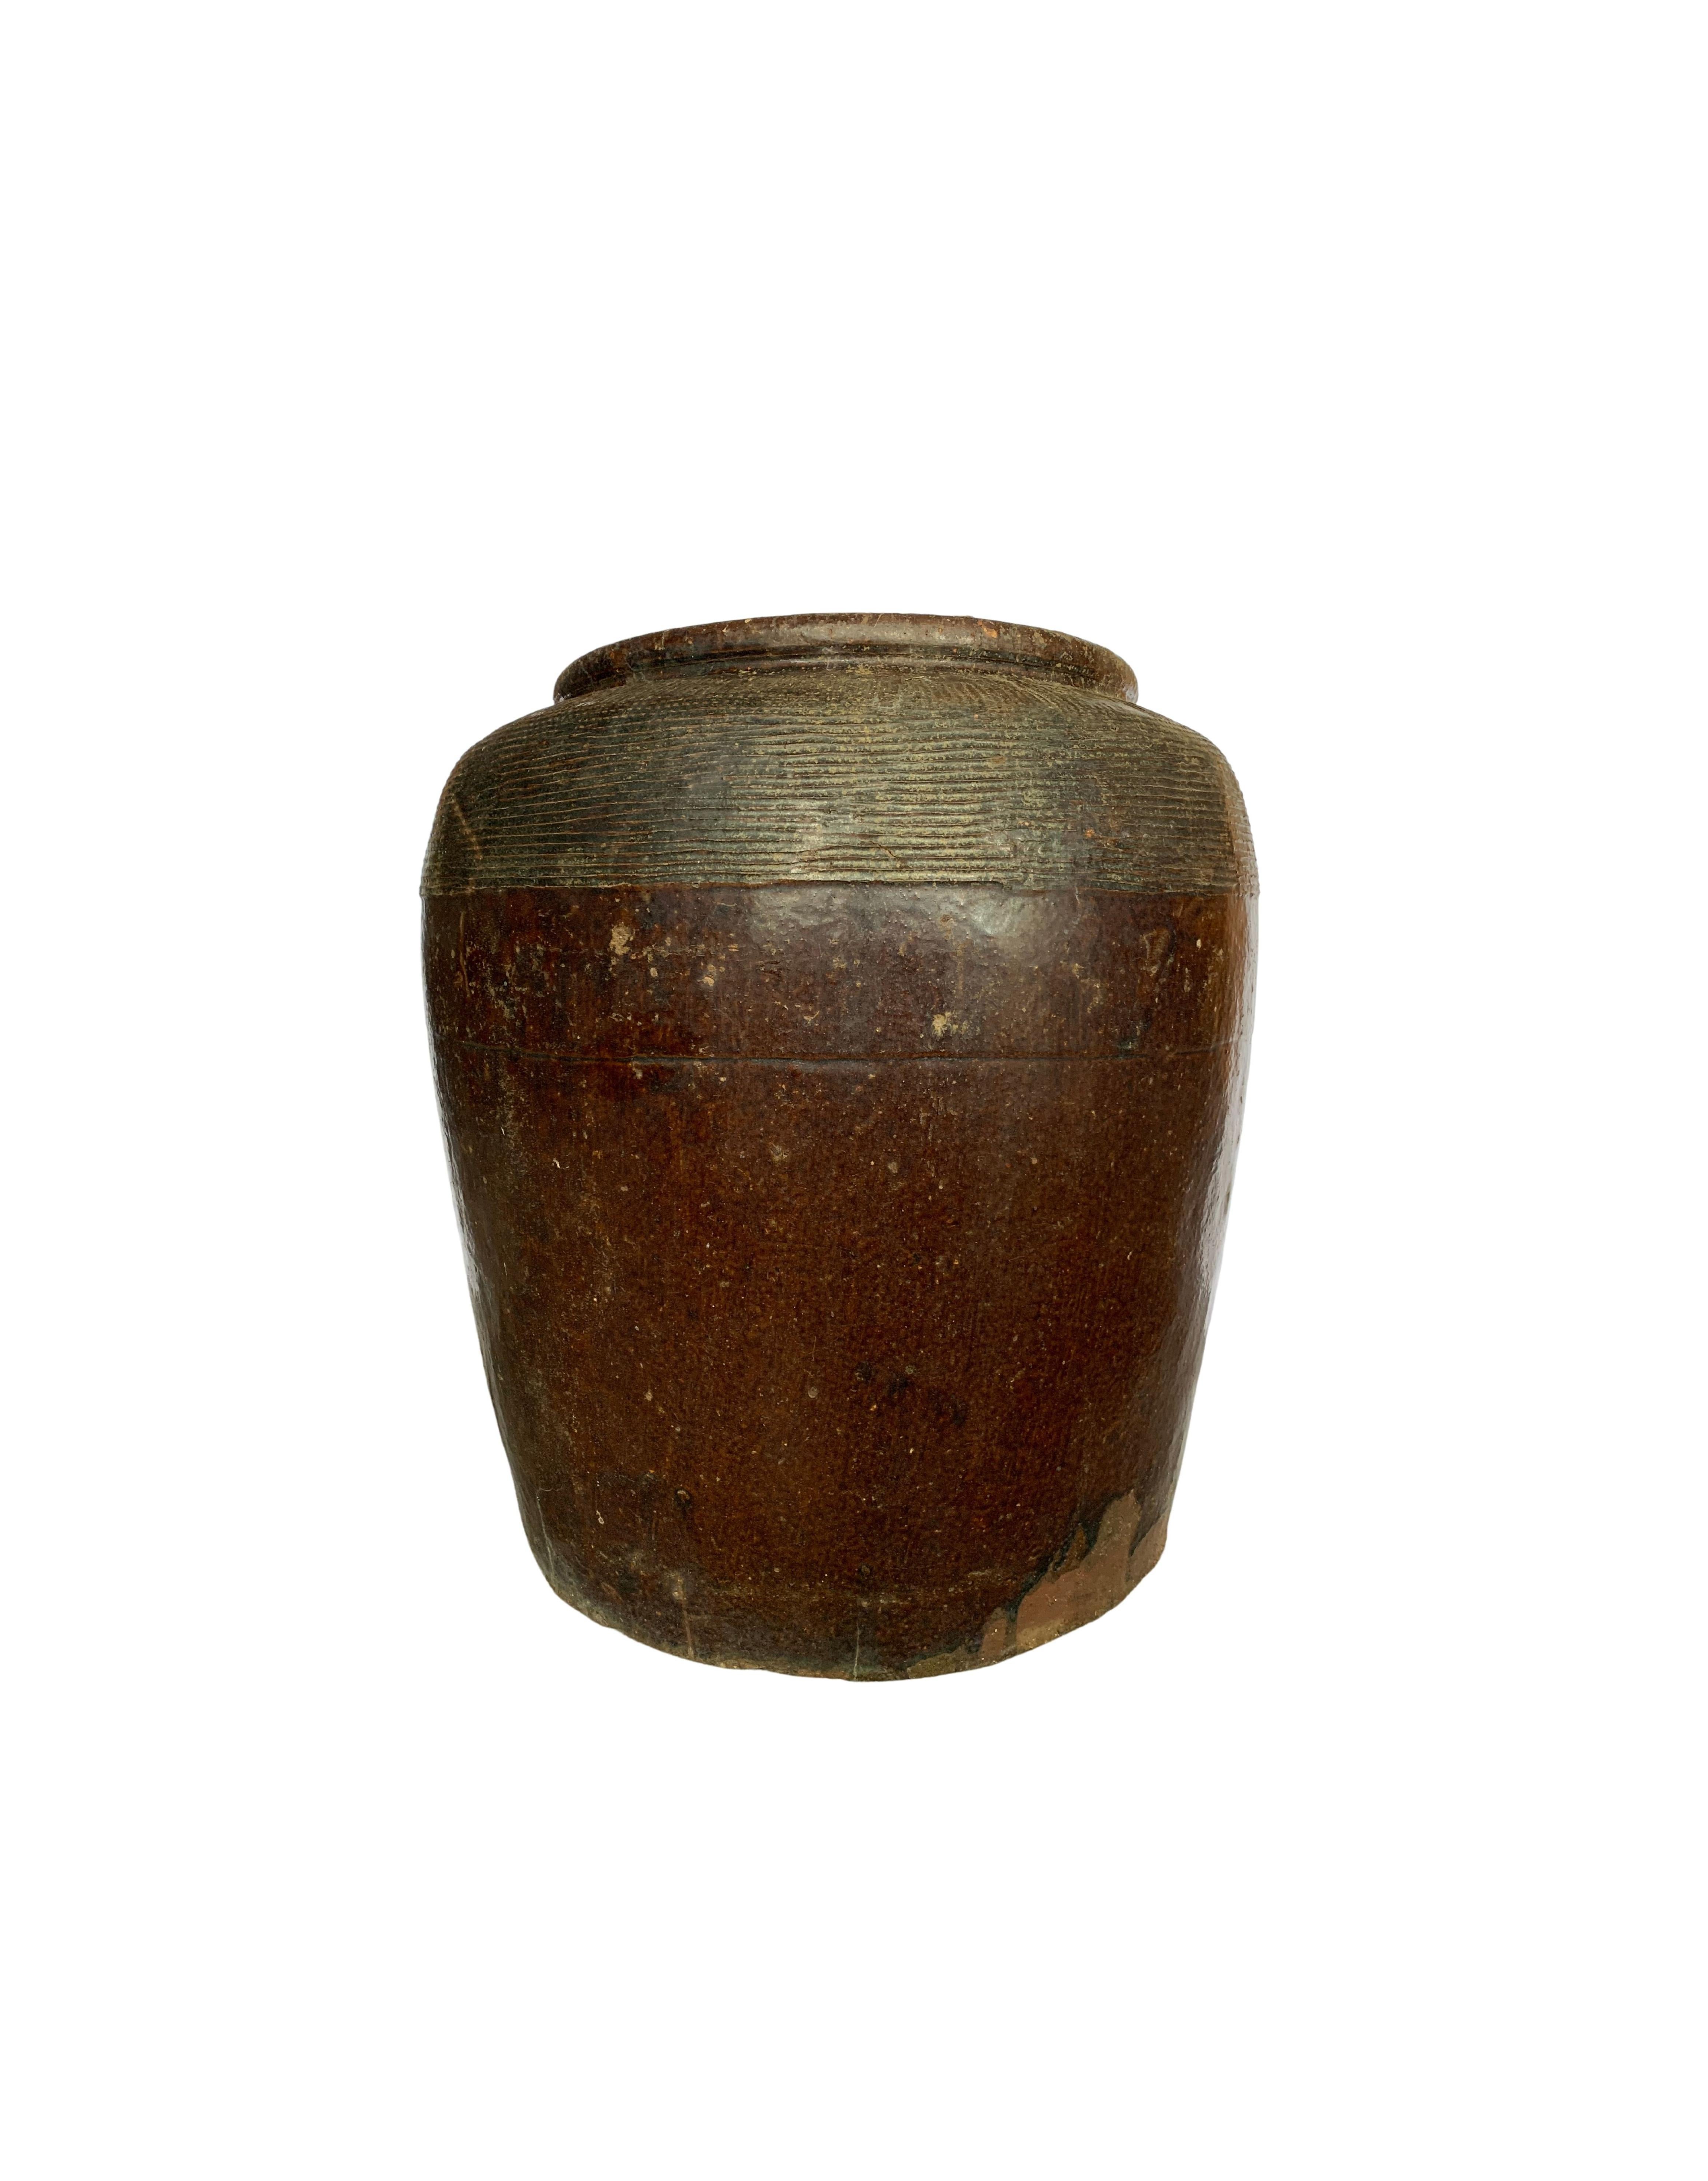 This Antique Jar dating to the early 1900s once served the purpose of crafting salty eggs. The jar features a wonderful brown glaze. There is a ridged pattern finish near to the Jar's rim. The jar is visibly old with the fading and markings to the